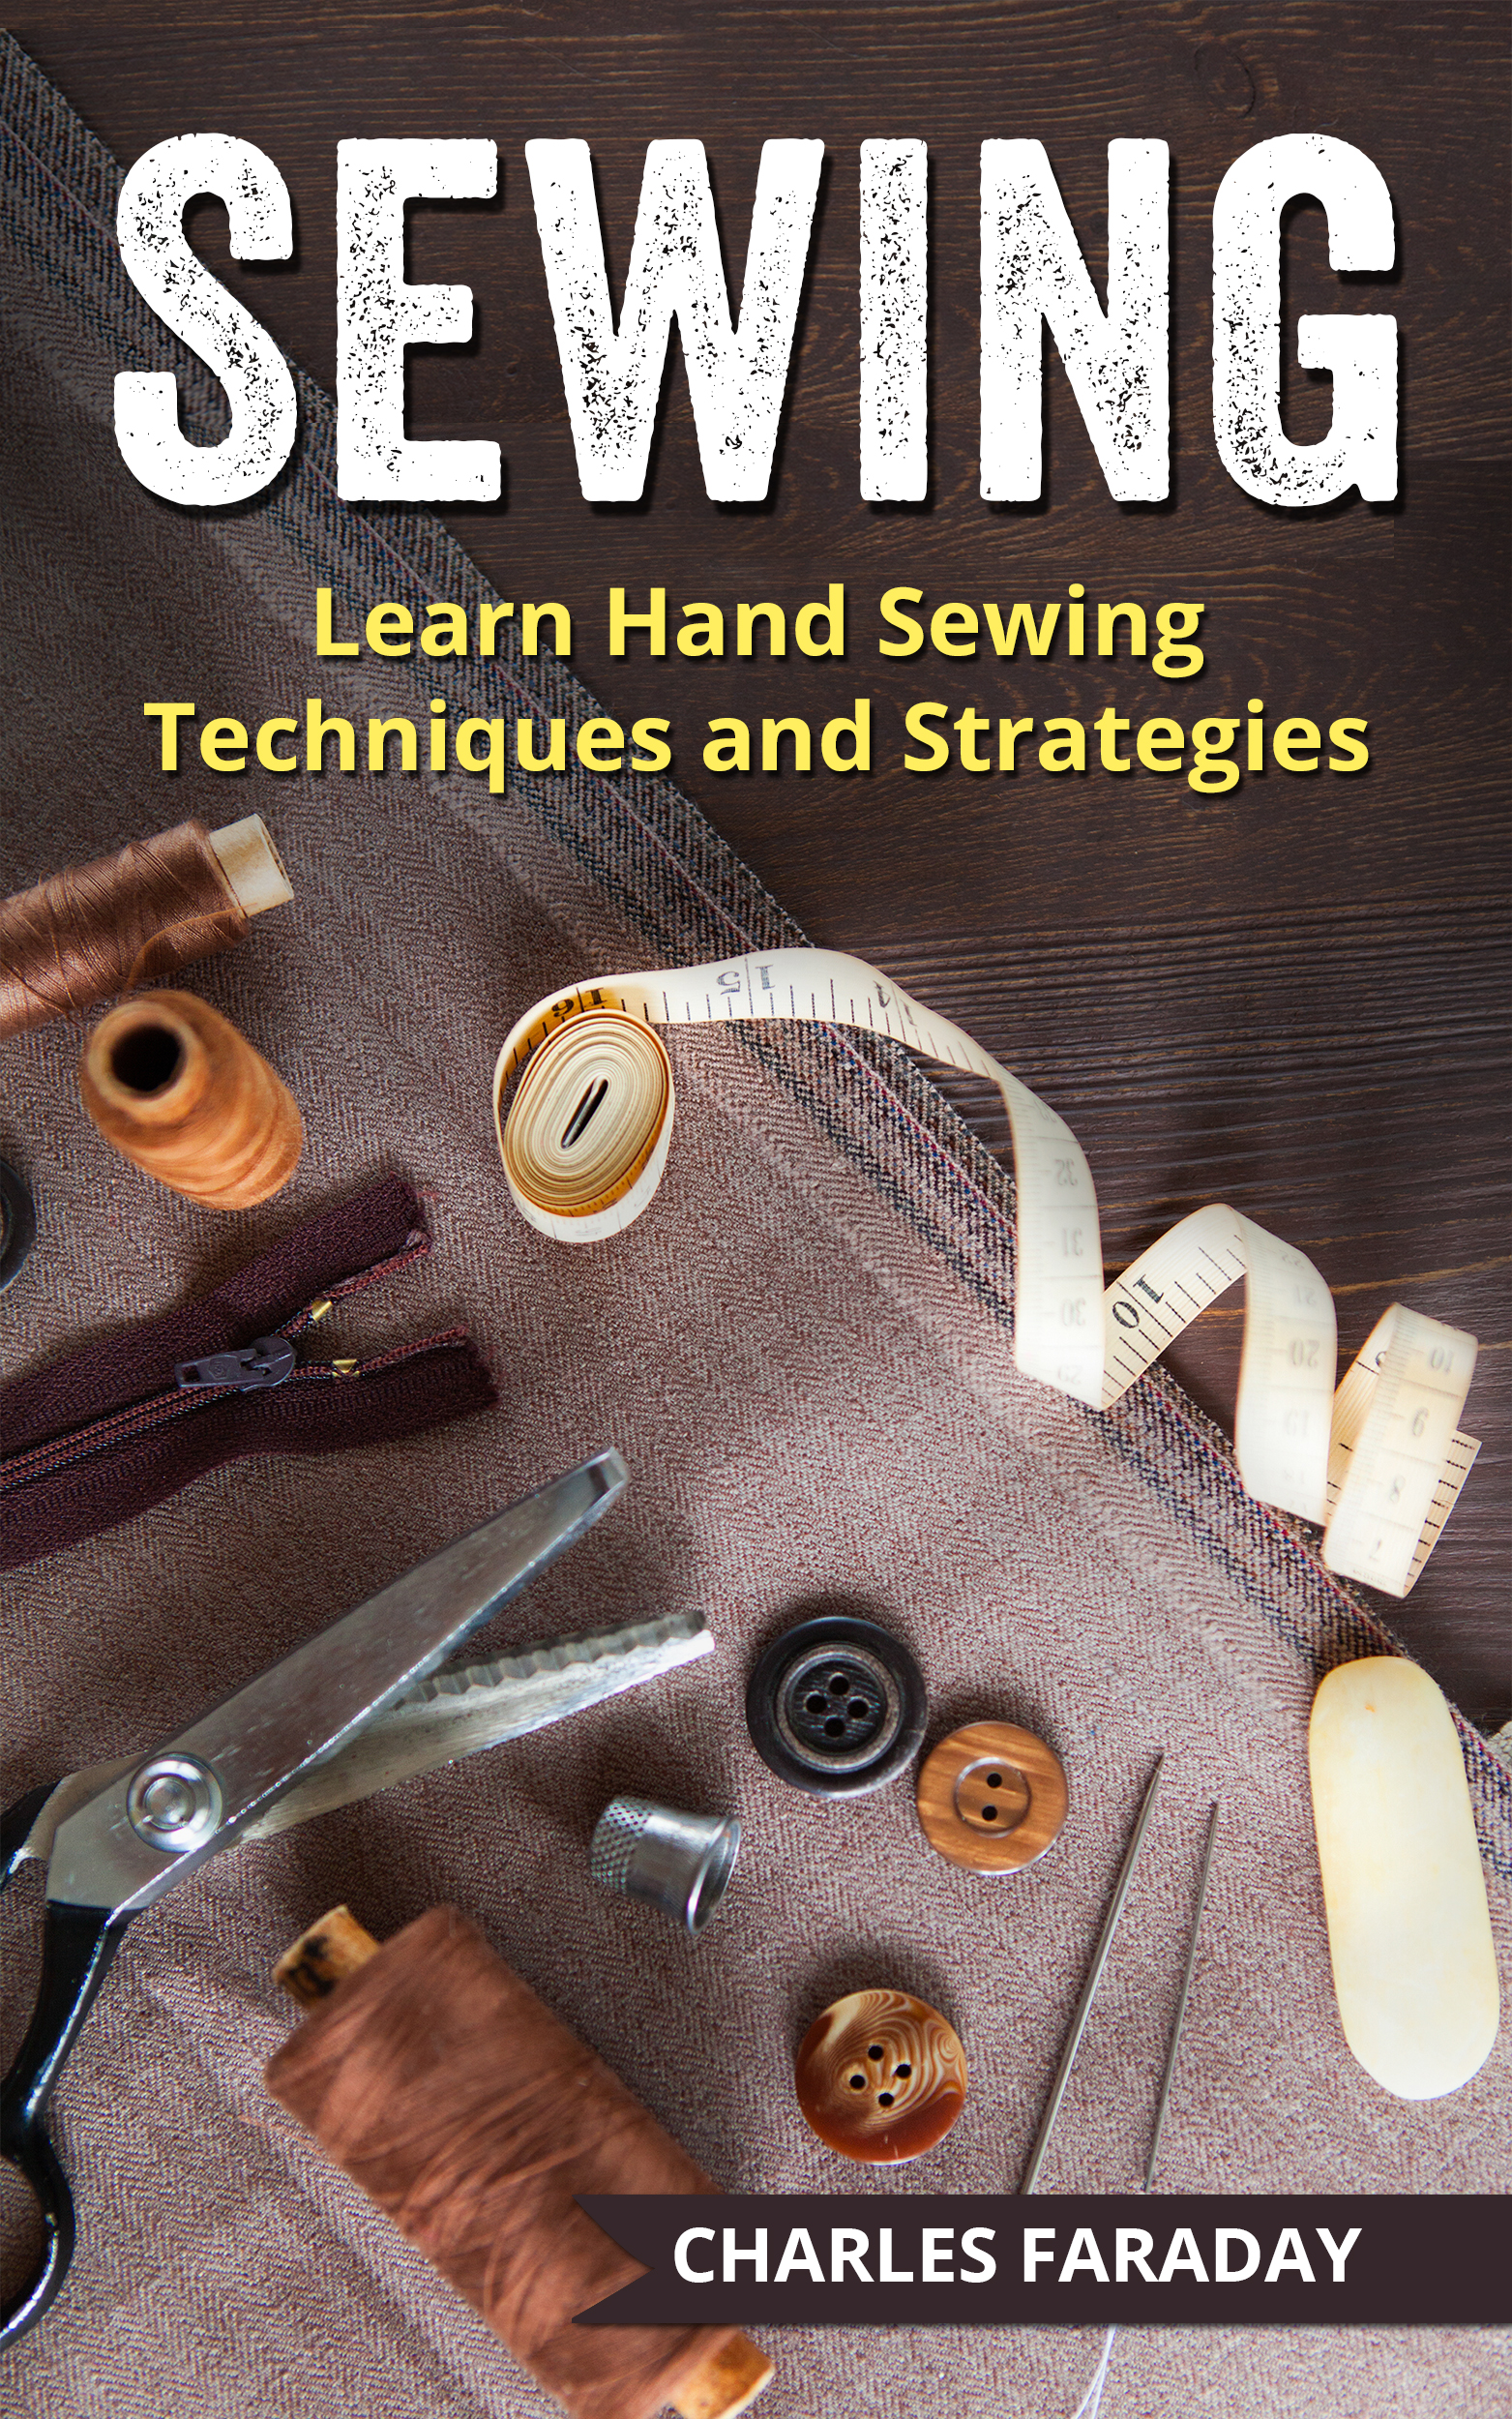 FREE: Sewing: Learn Hand Sewing Techniques And Strategies by Charles Faraday